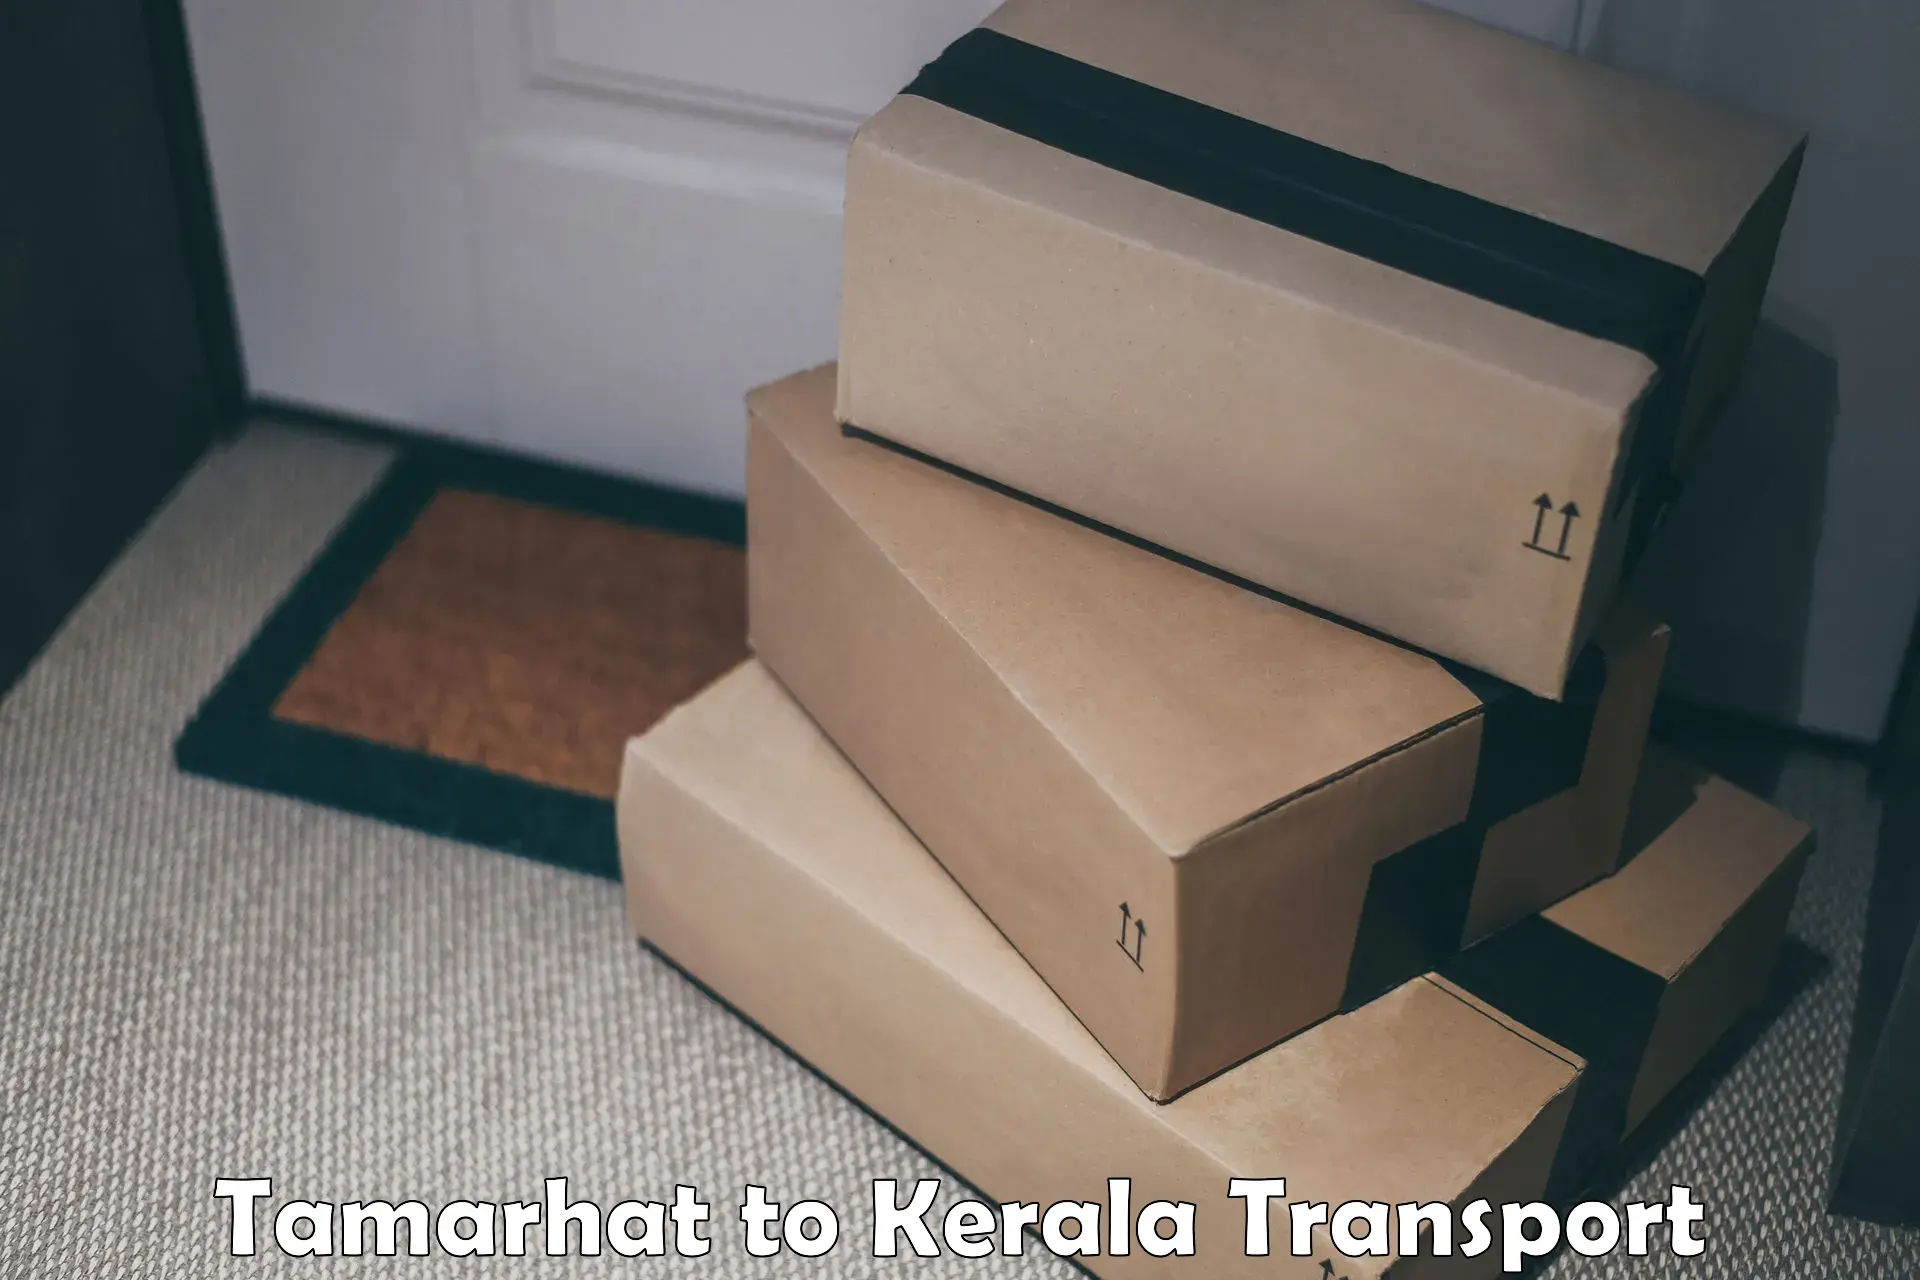 Pick up transport service Tamarhat to Cochin